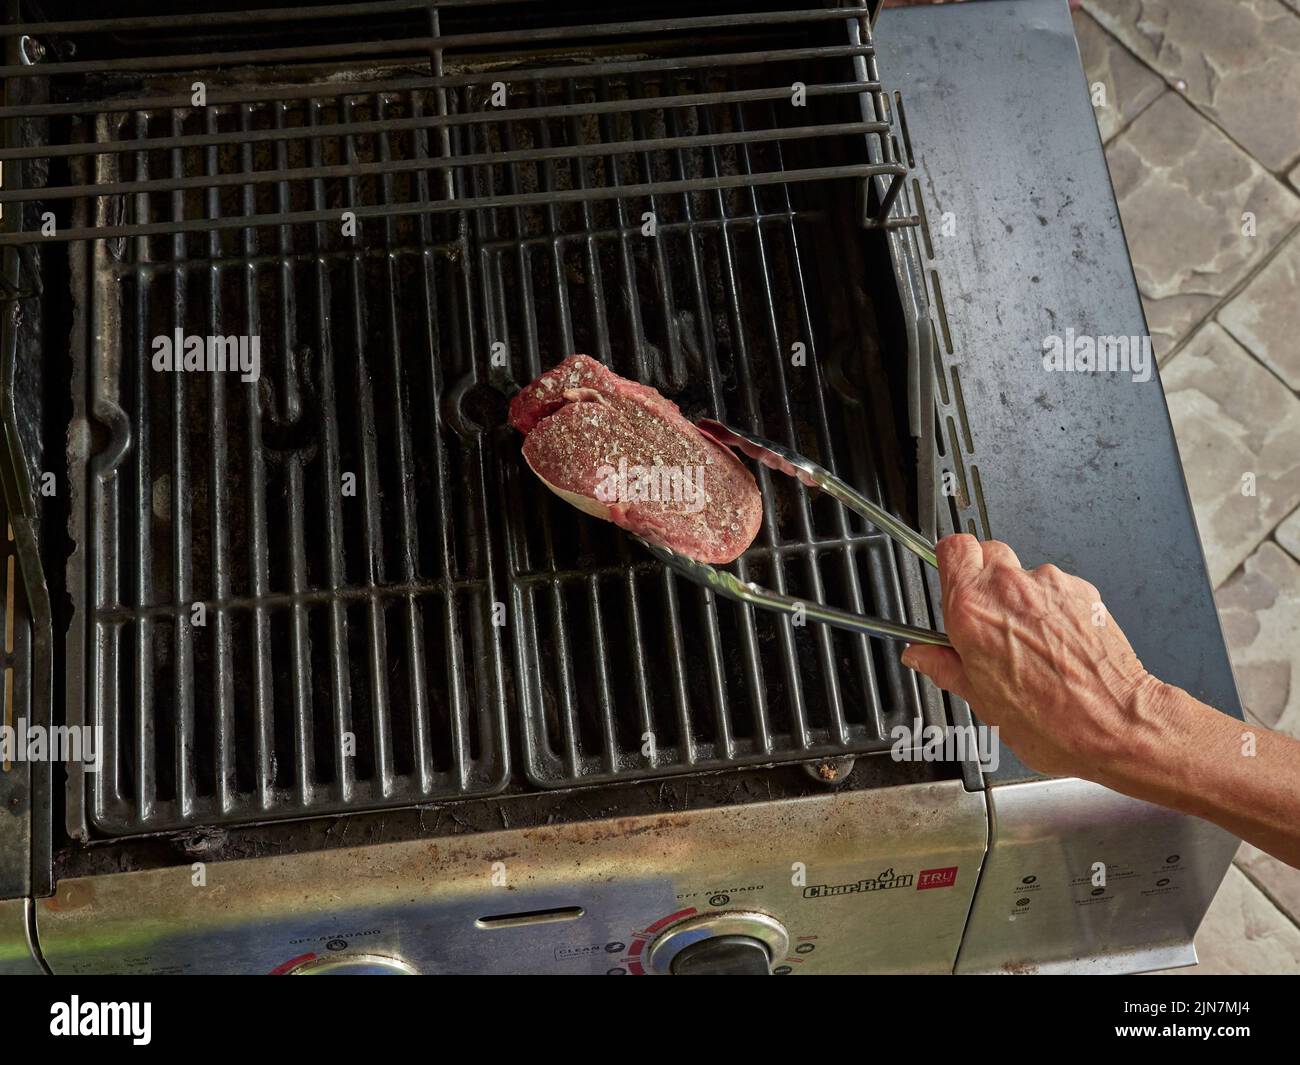 Person placing a raw filet steak on a barbecue grill to cook the red meat for dinner. Stock Photo